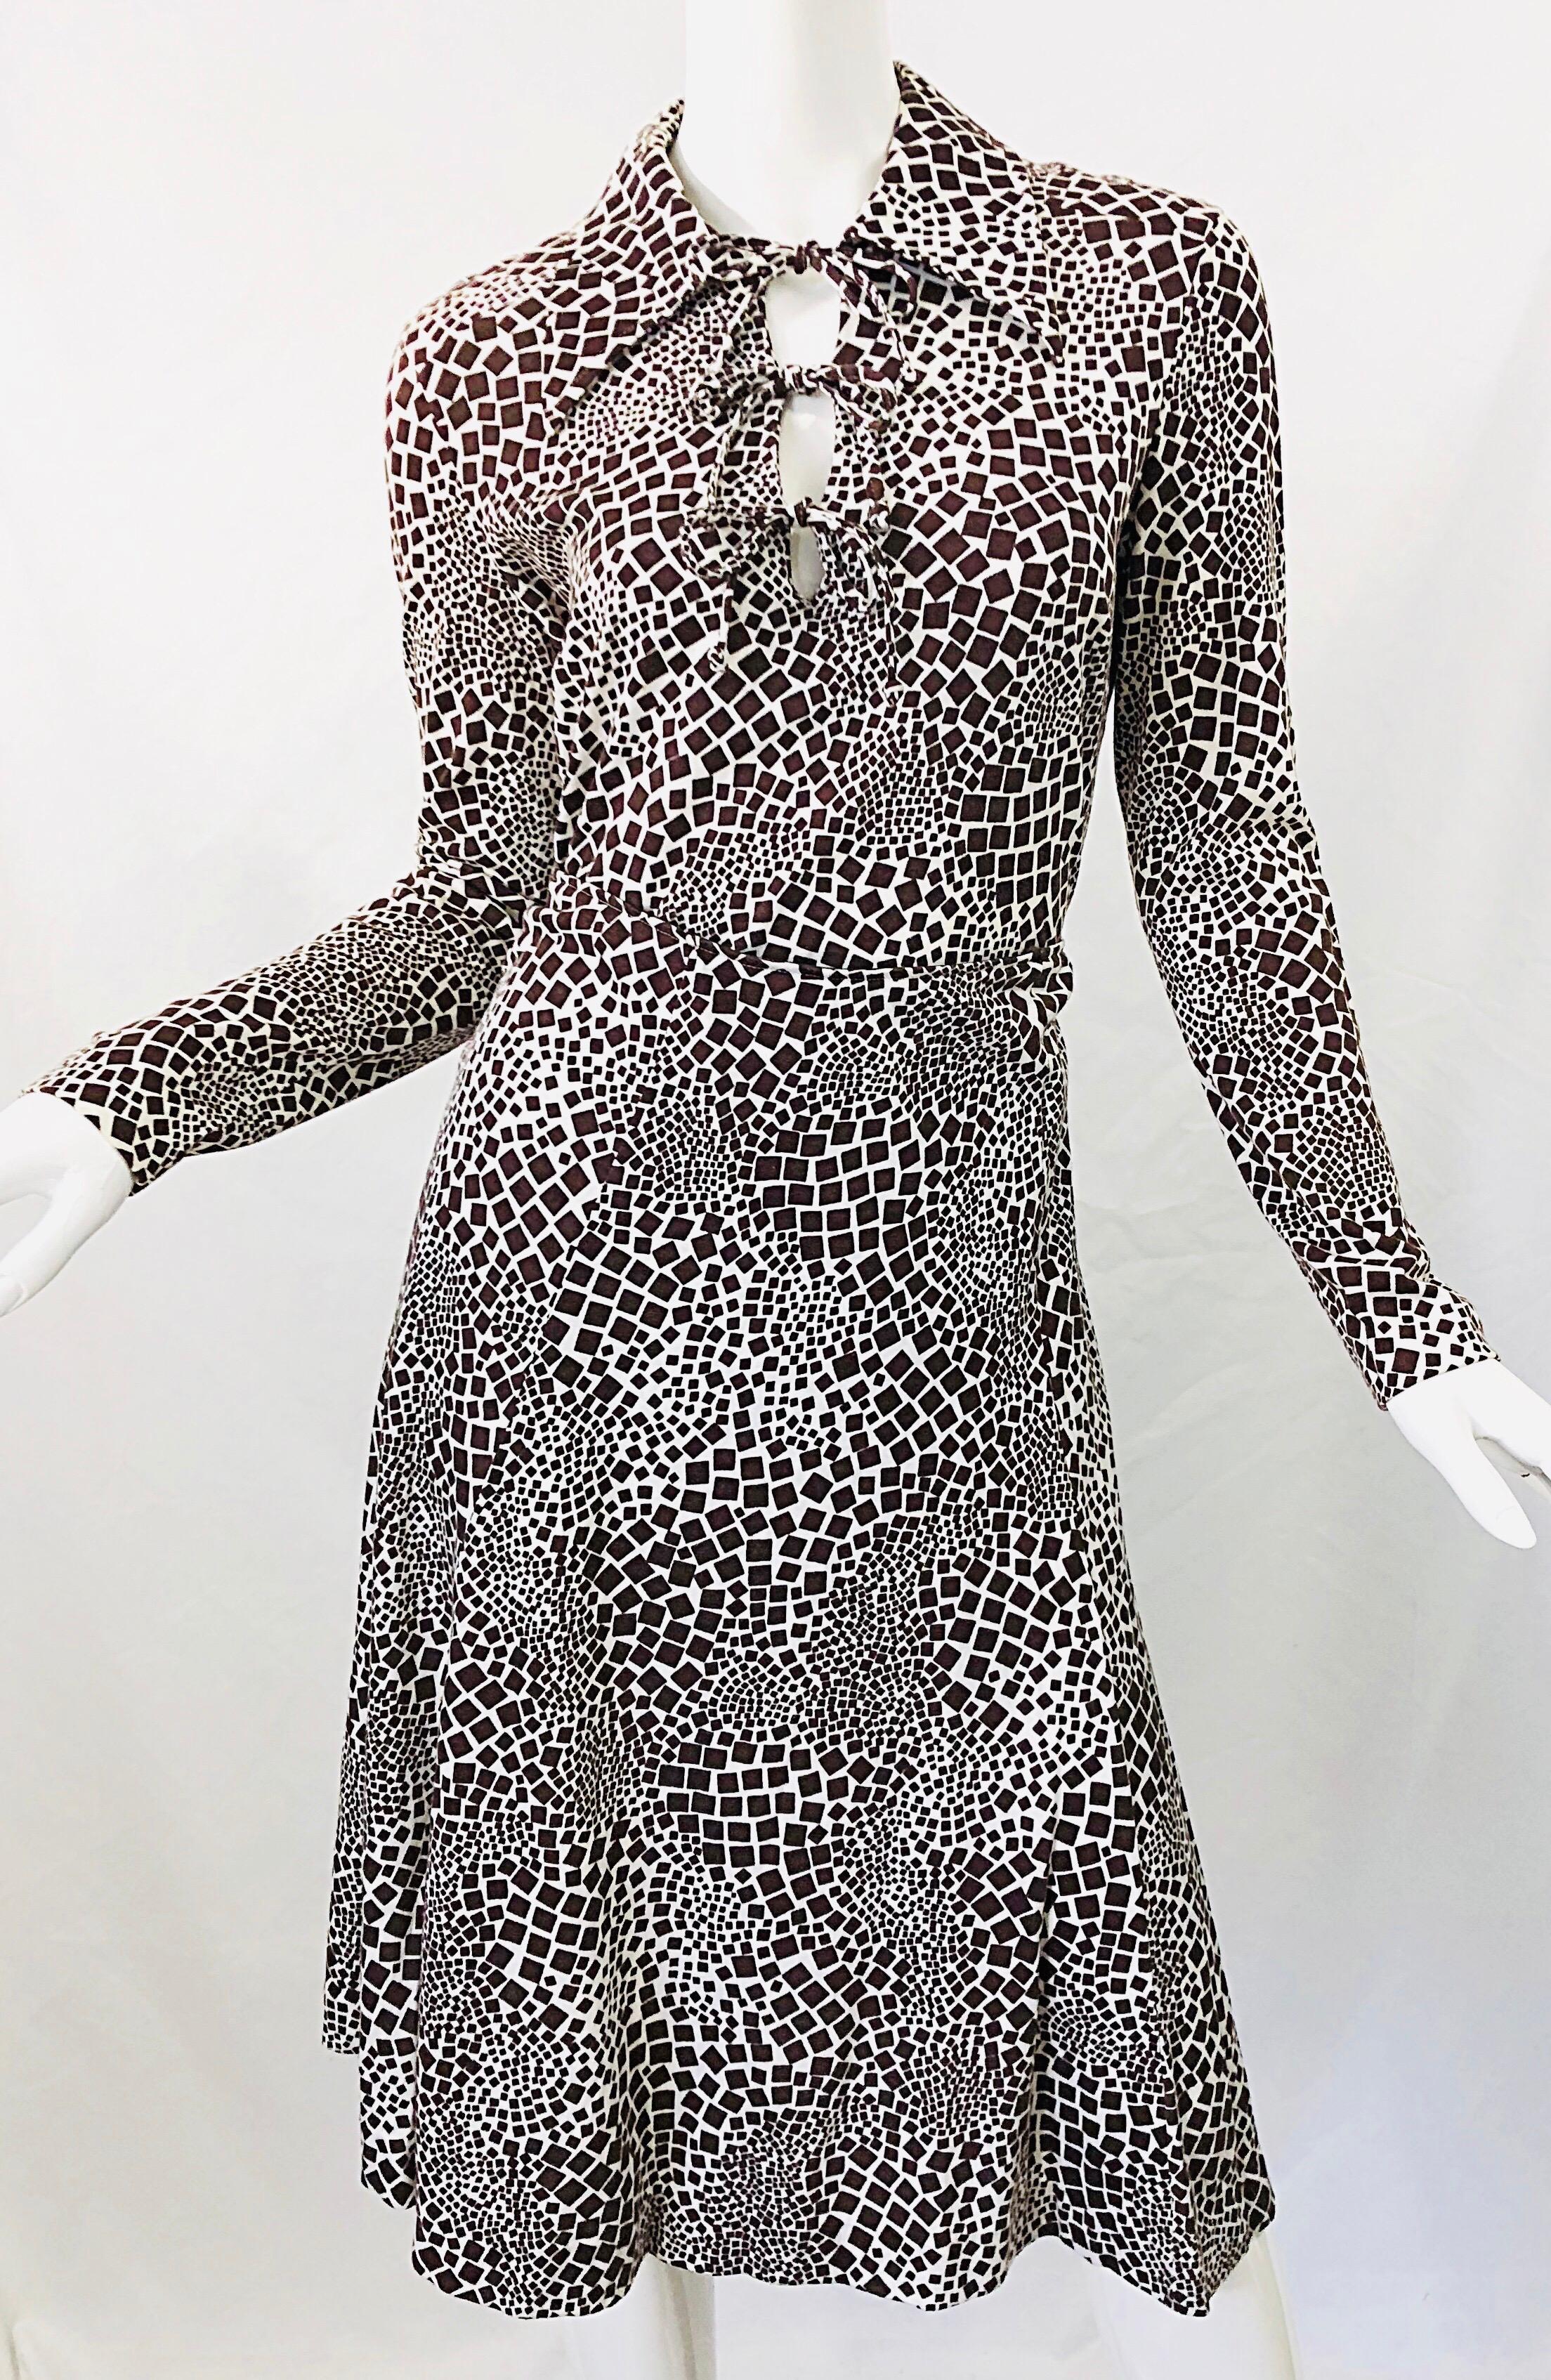 1970s Diane Von Furstenberg Brown and White Rayon Cotton Cut Out Top Skirt Dress 2